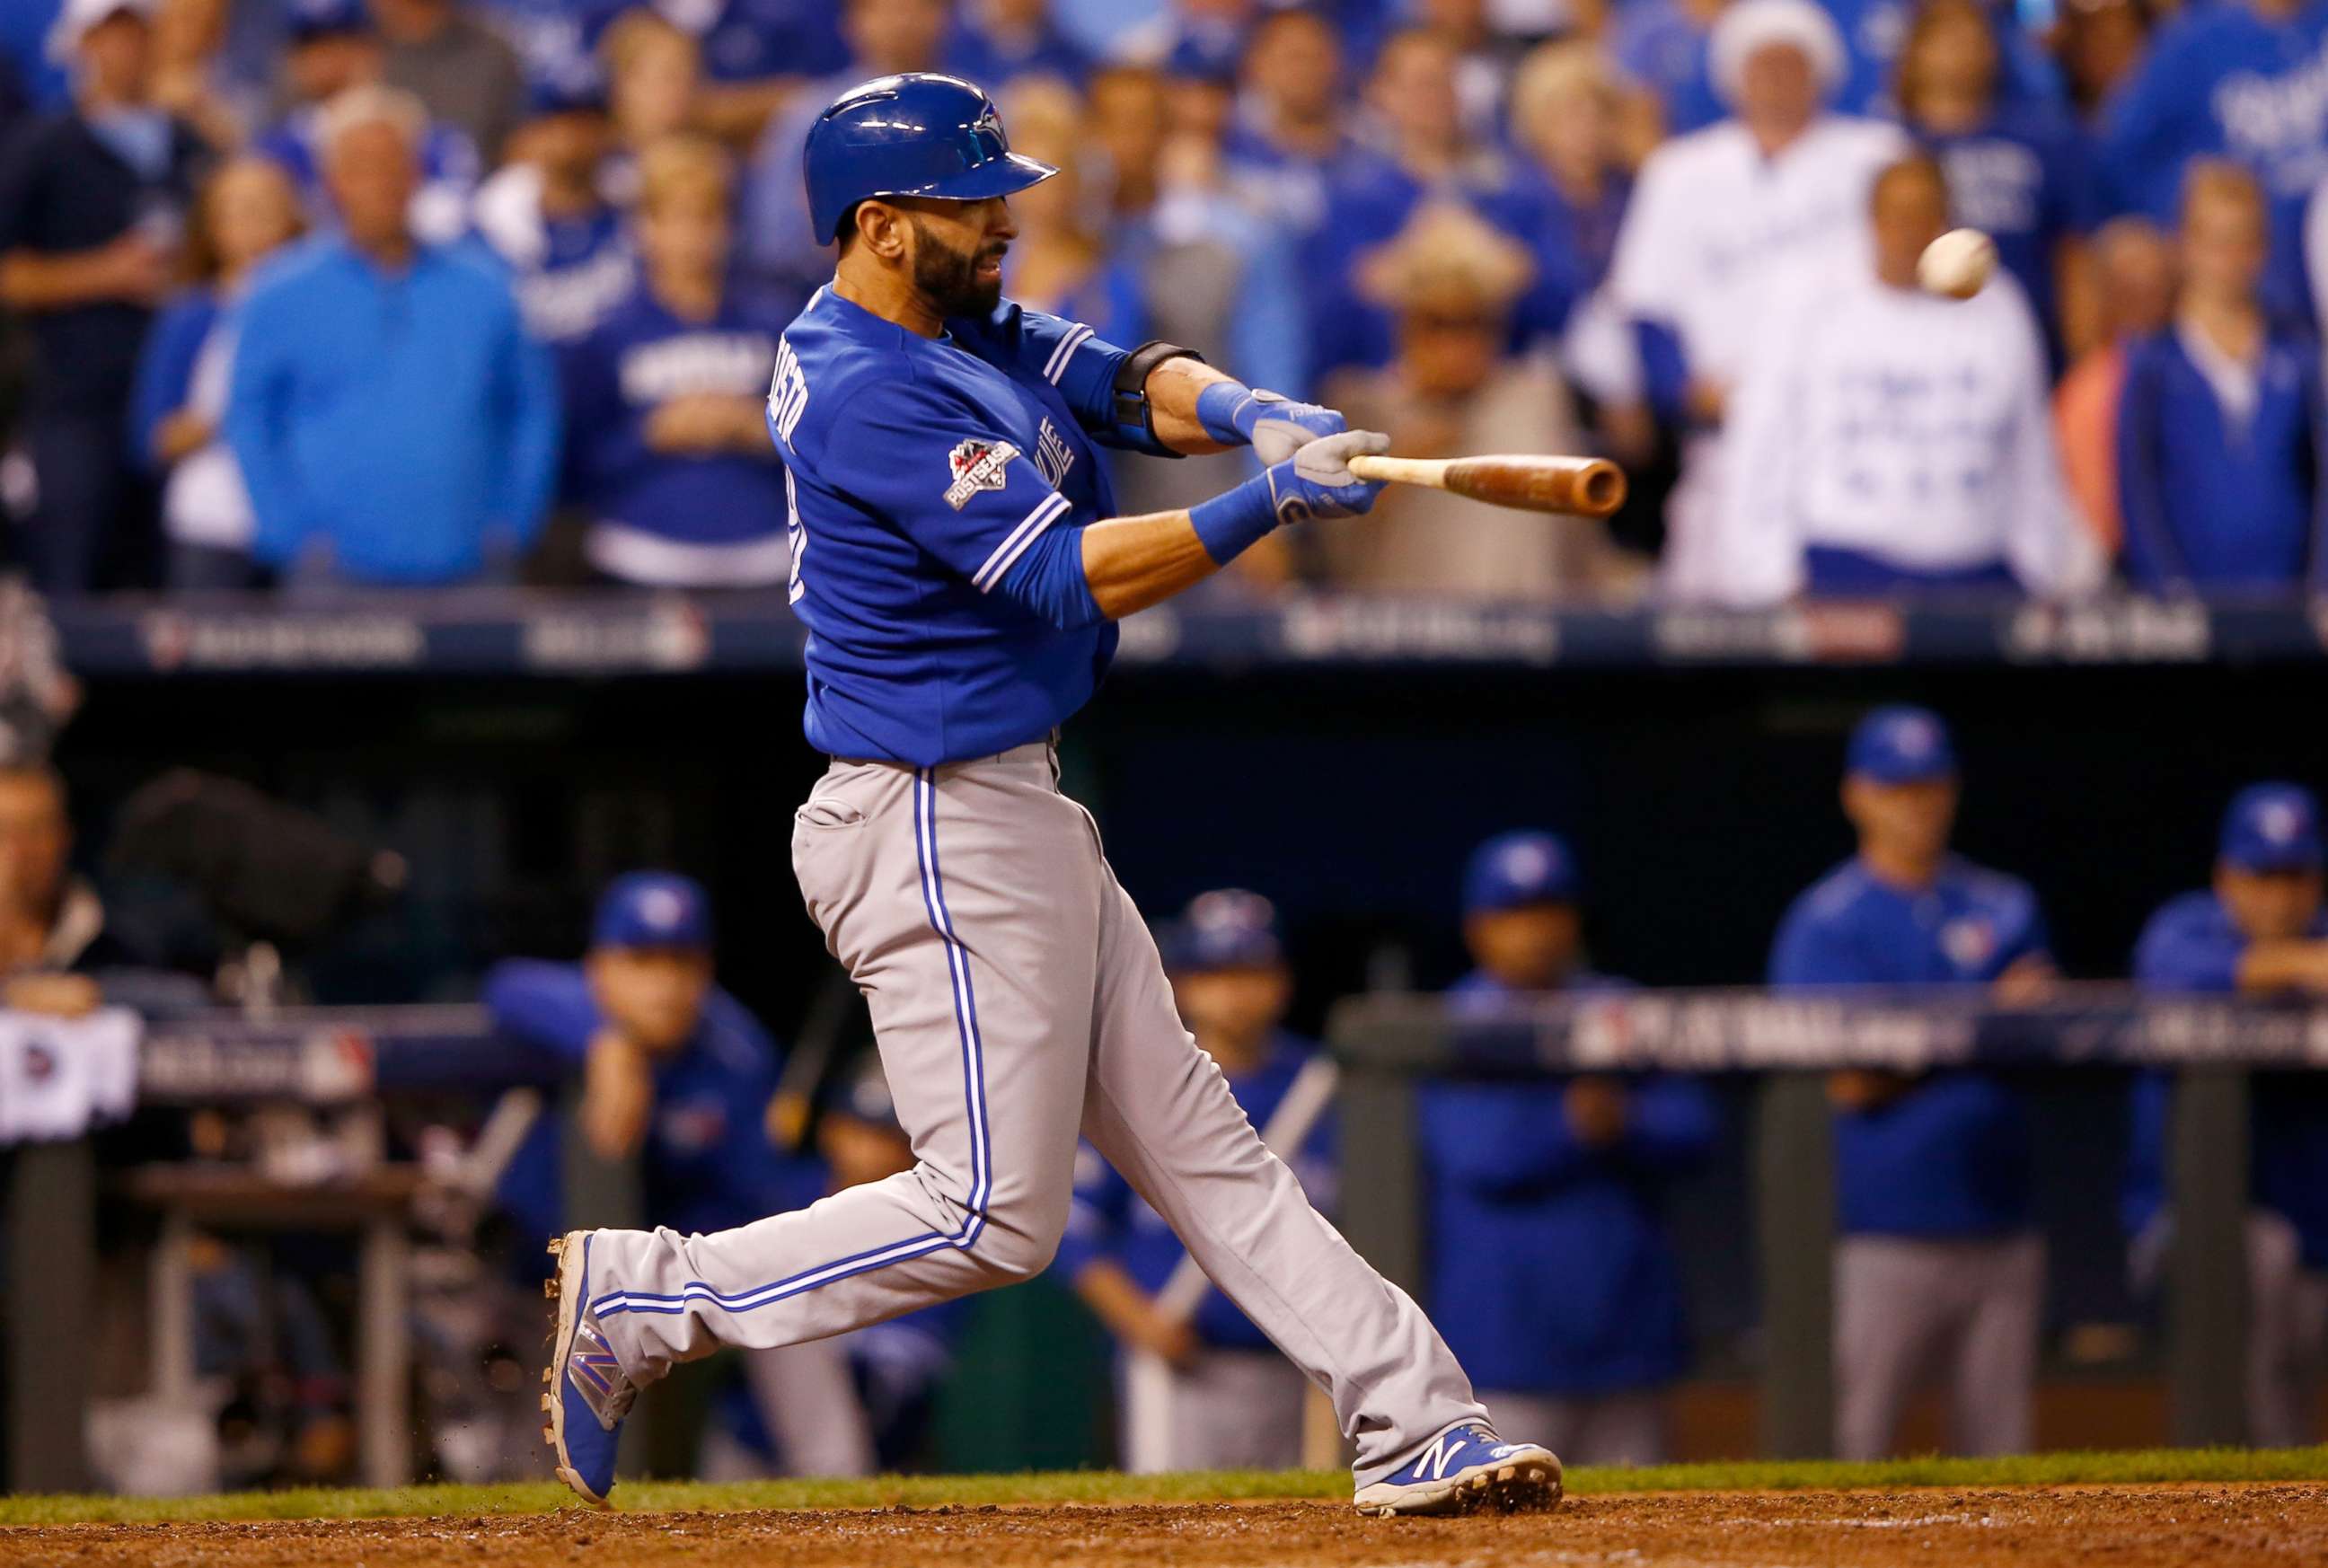 PHOTO: Jose Bautista of the Toronto Blue Jays during the  2015 MLB American League Championship Series at Kauffman Stadium in this Oct. 23, 2015 file photo in Kansas City, Mo.